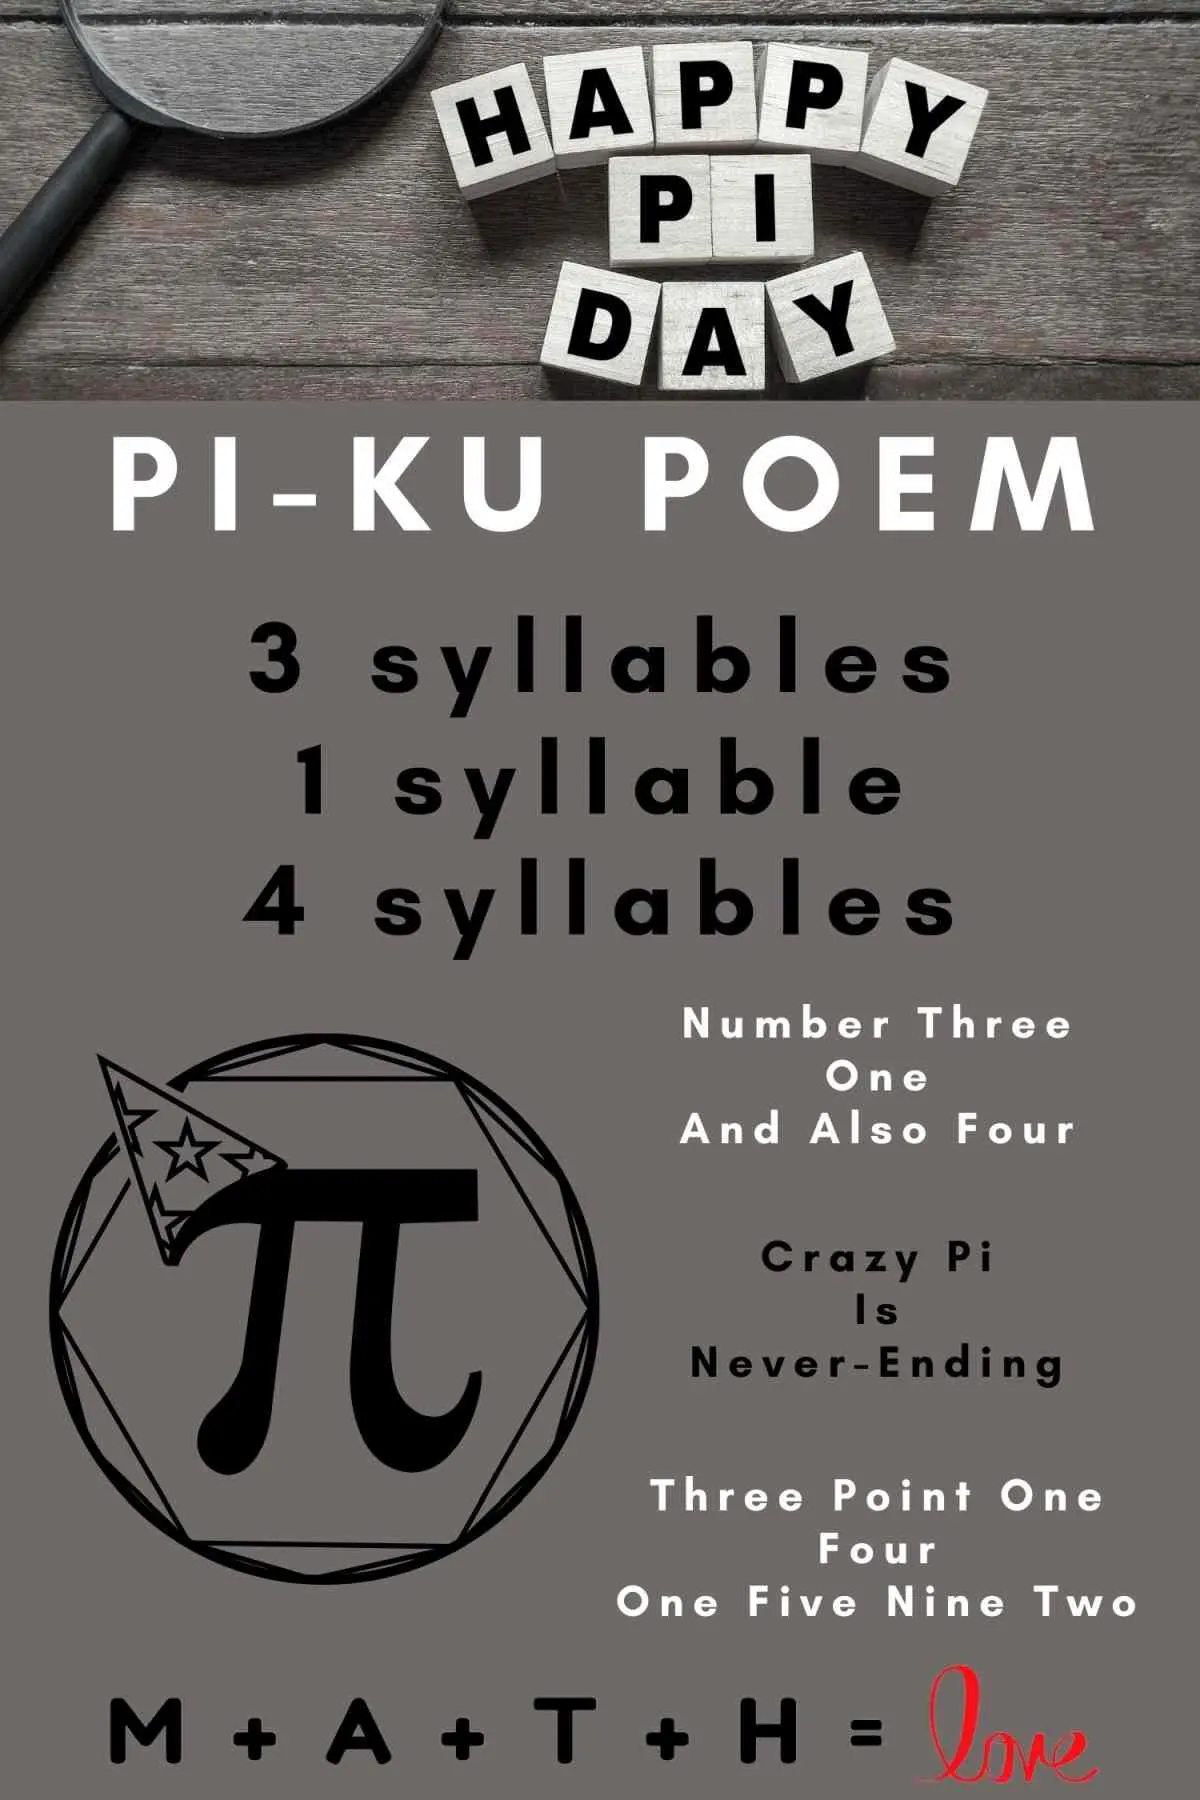 Pi Ku Poem Explanation of Syllables and Examples of Poems